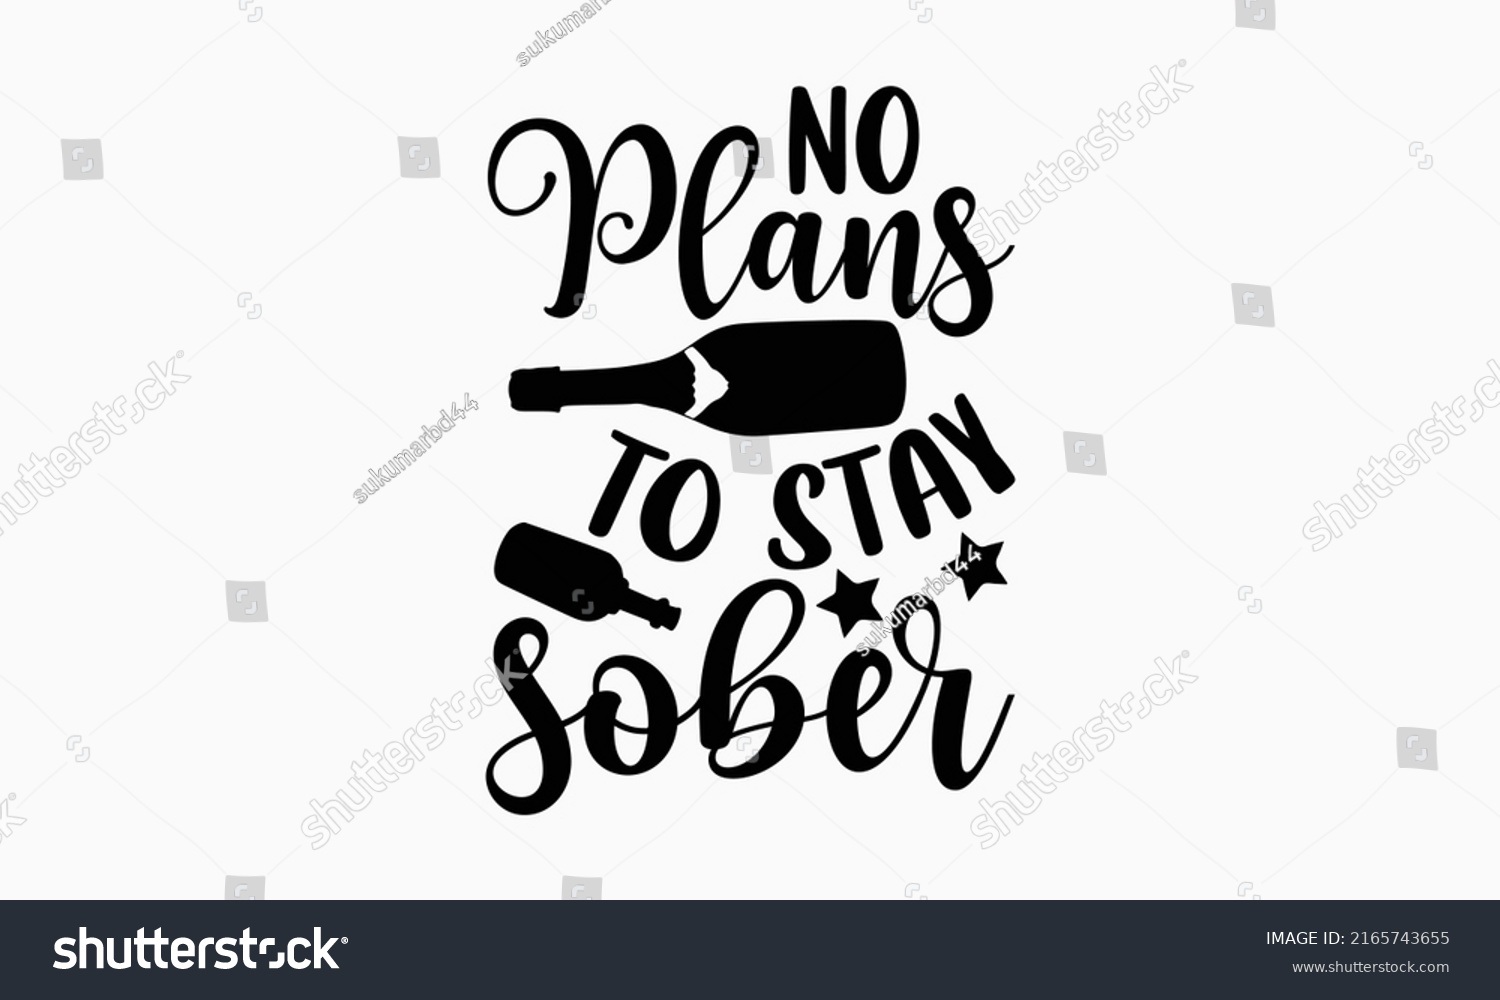 SVG of No plans to stay sober - Alcohol t shirt design, Hand drawn lettering phrase, Calligraphy graphic design, SVG Files for Cutting Cricut and Silhouette svg